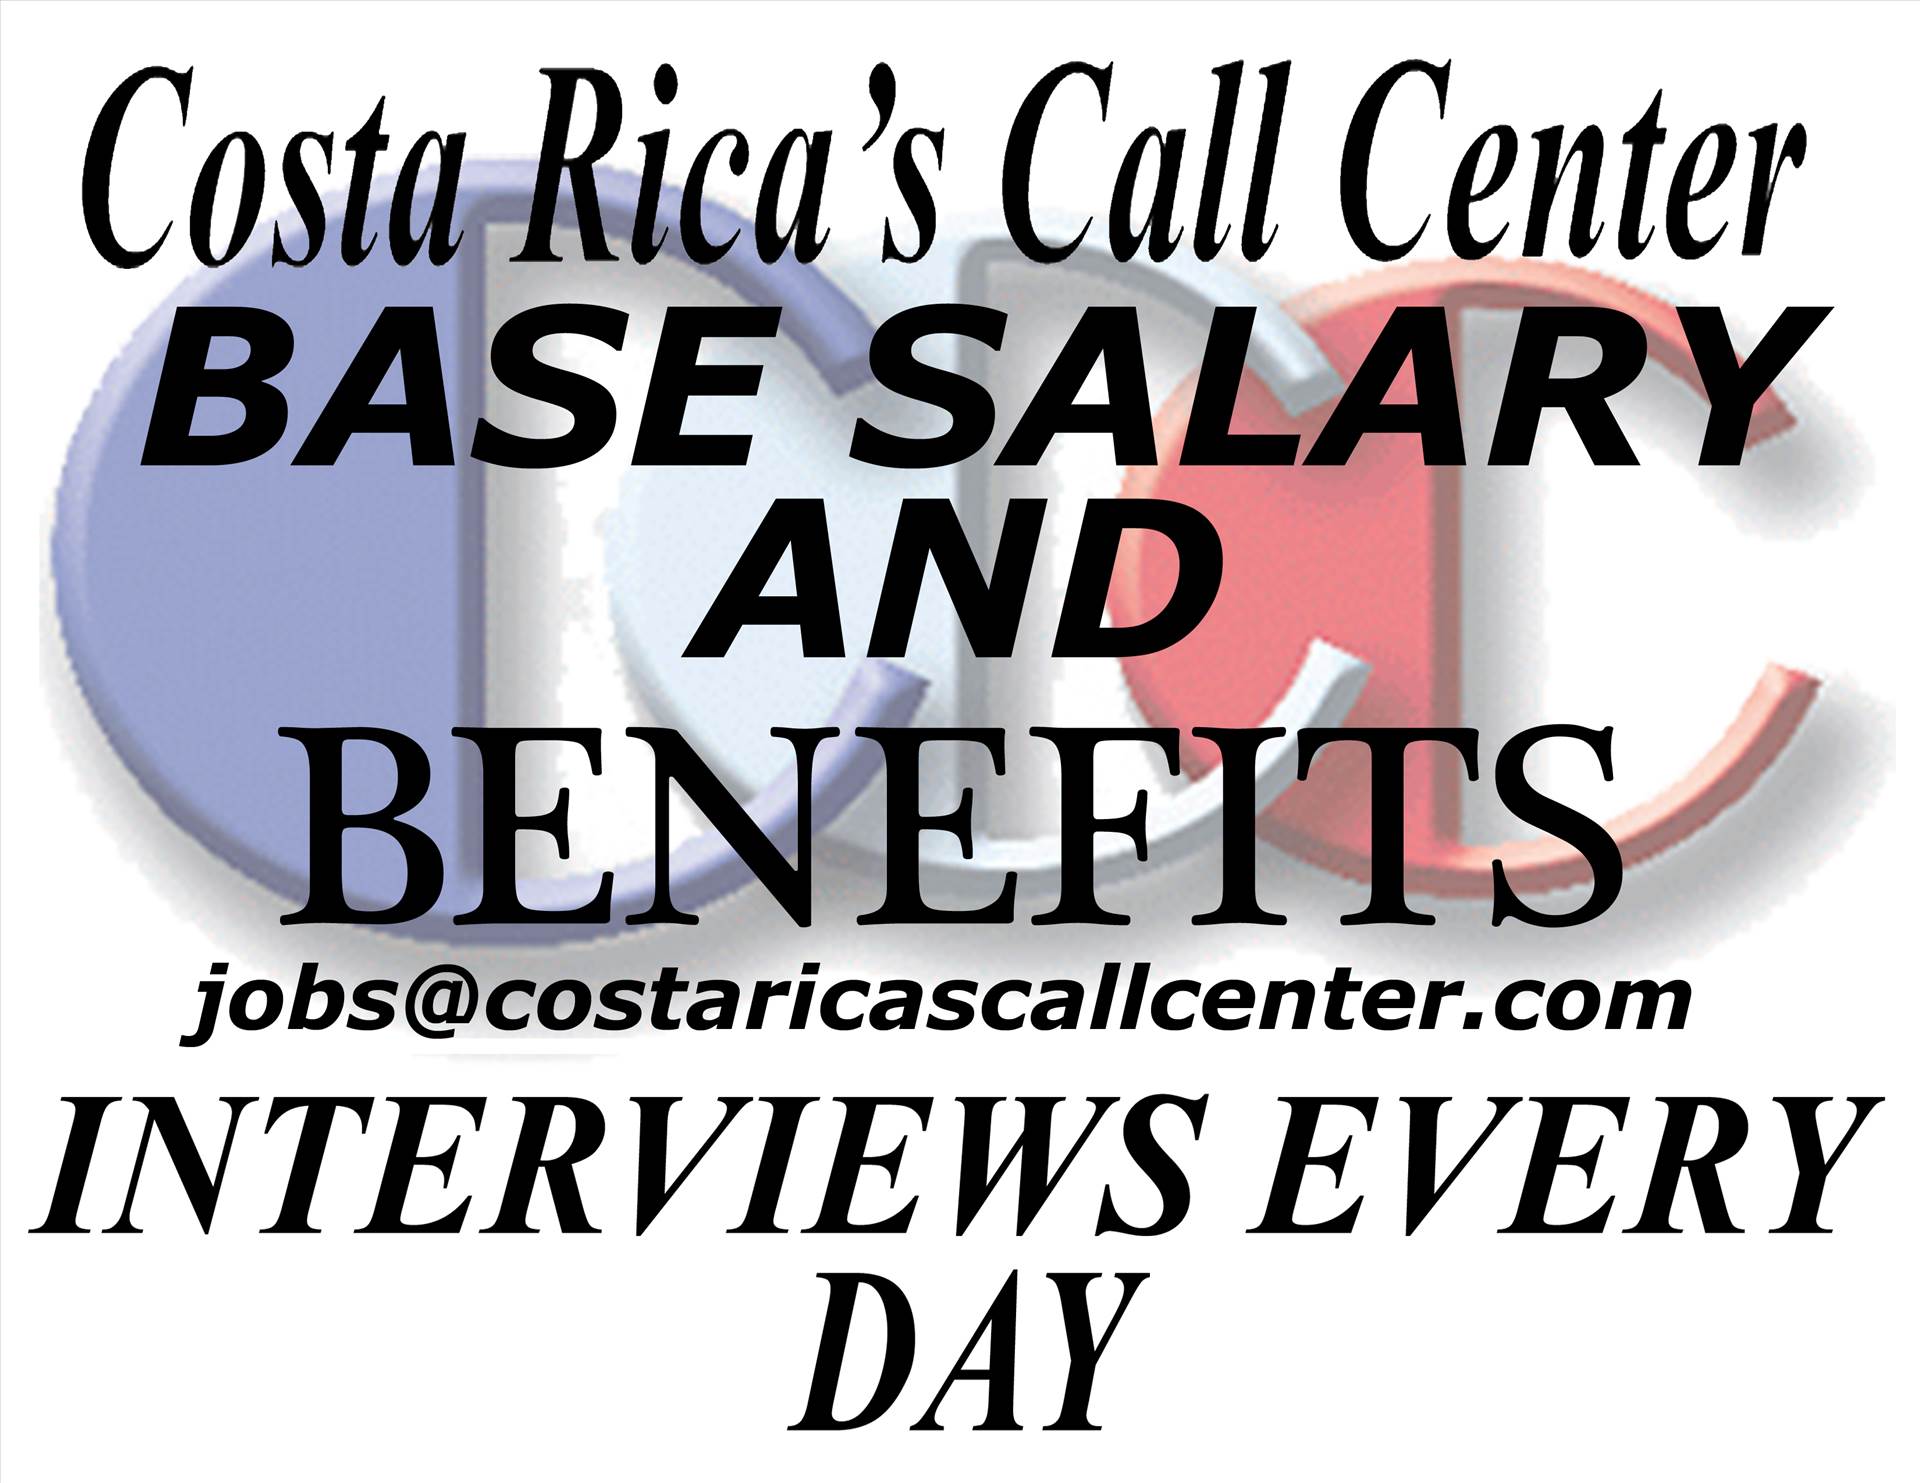 CCC SALARY AND BENEFITS JOB WORK.jpg THE OUTSOURCING INDUSTRY ACKNOWLEDGES A 10 YEAR ANNIVERSARY FOR COSTA RICA'S CALL CENTER. by richardblank